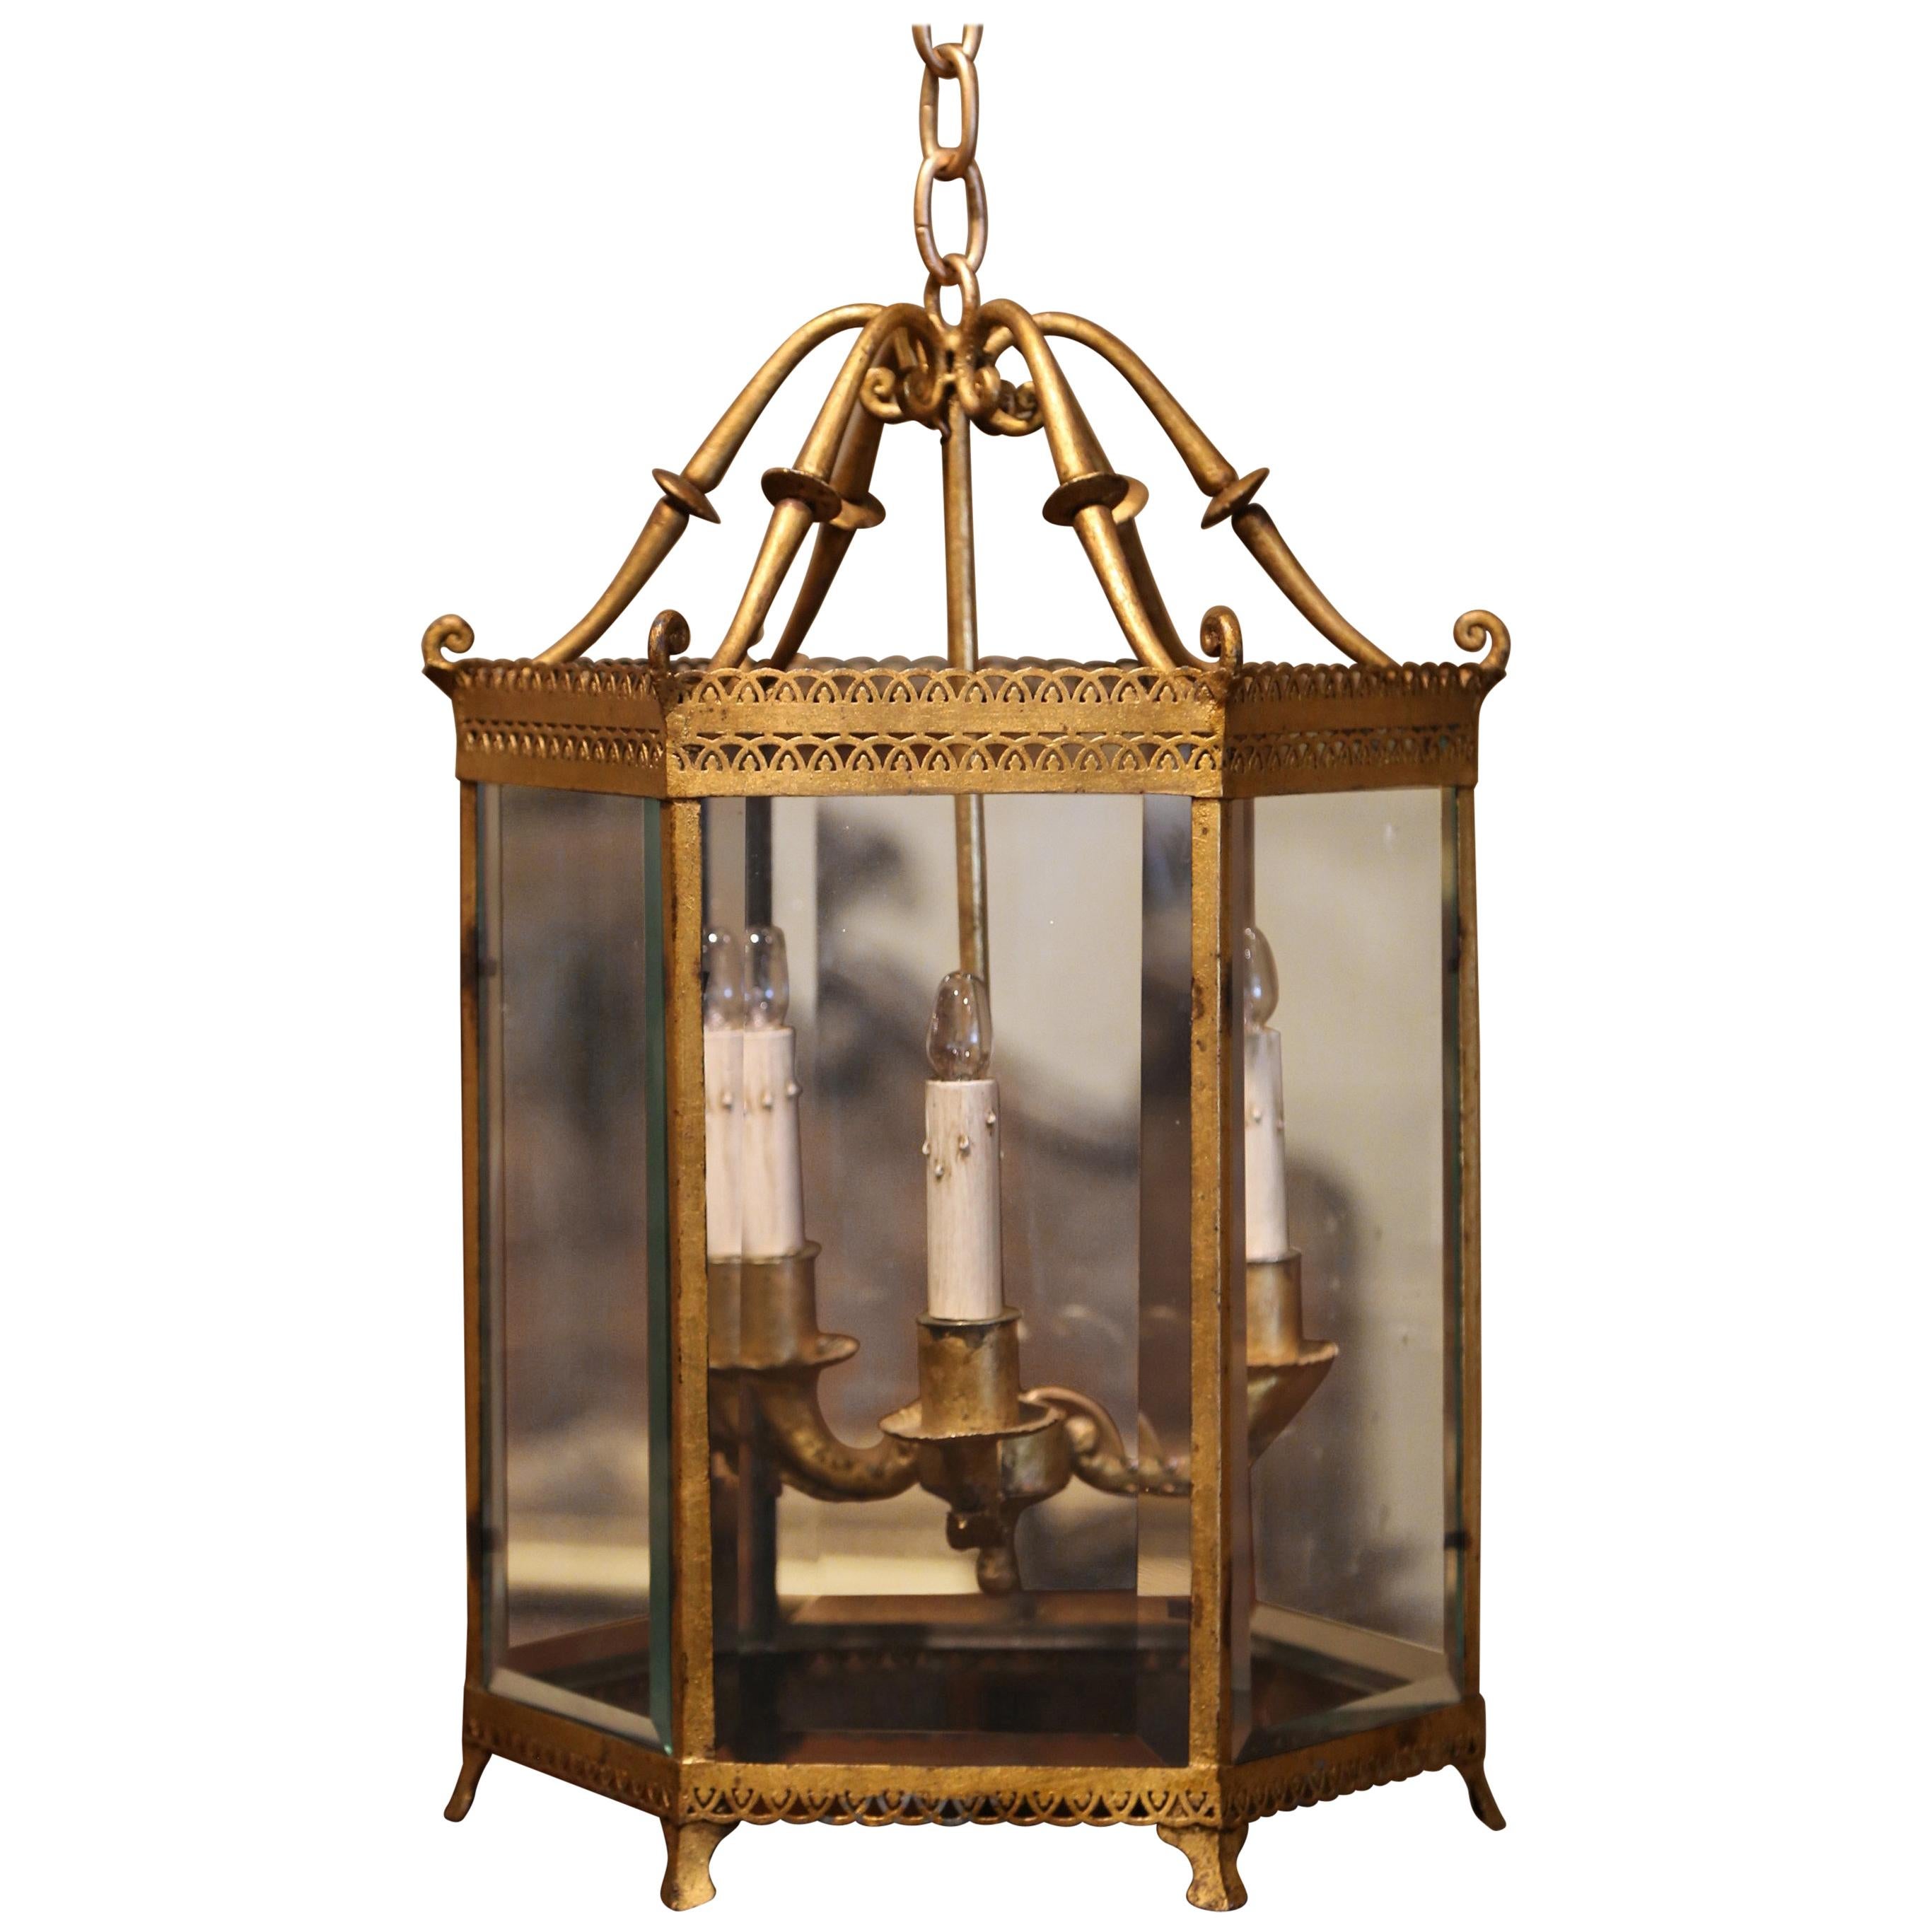 Early 20th Century French Gilt Metal and Beveled Glass Three-Light Lantern